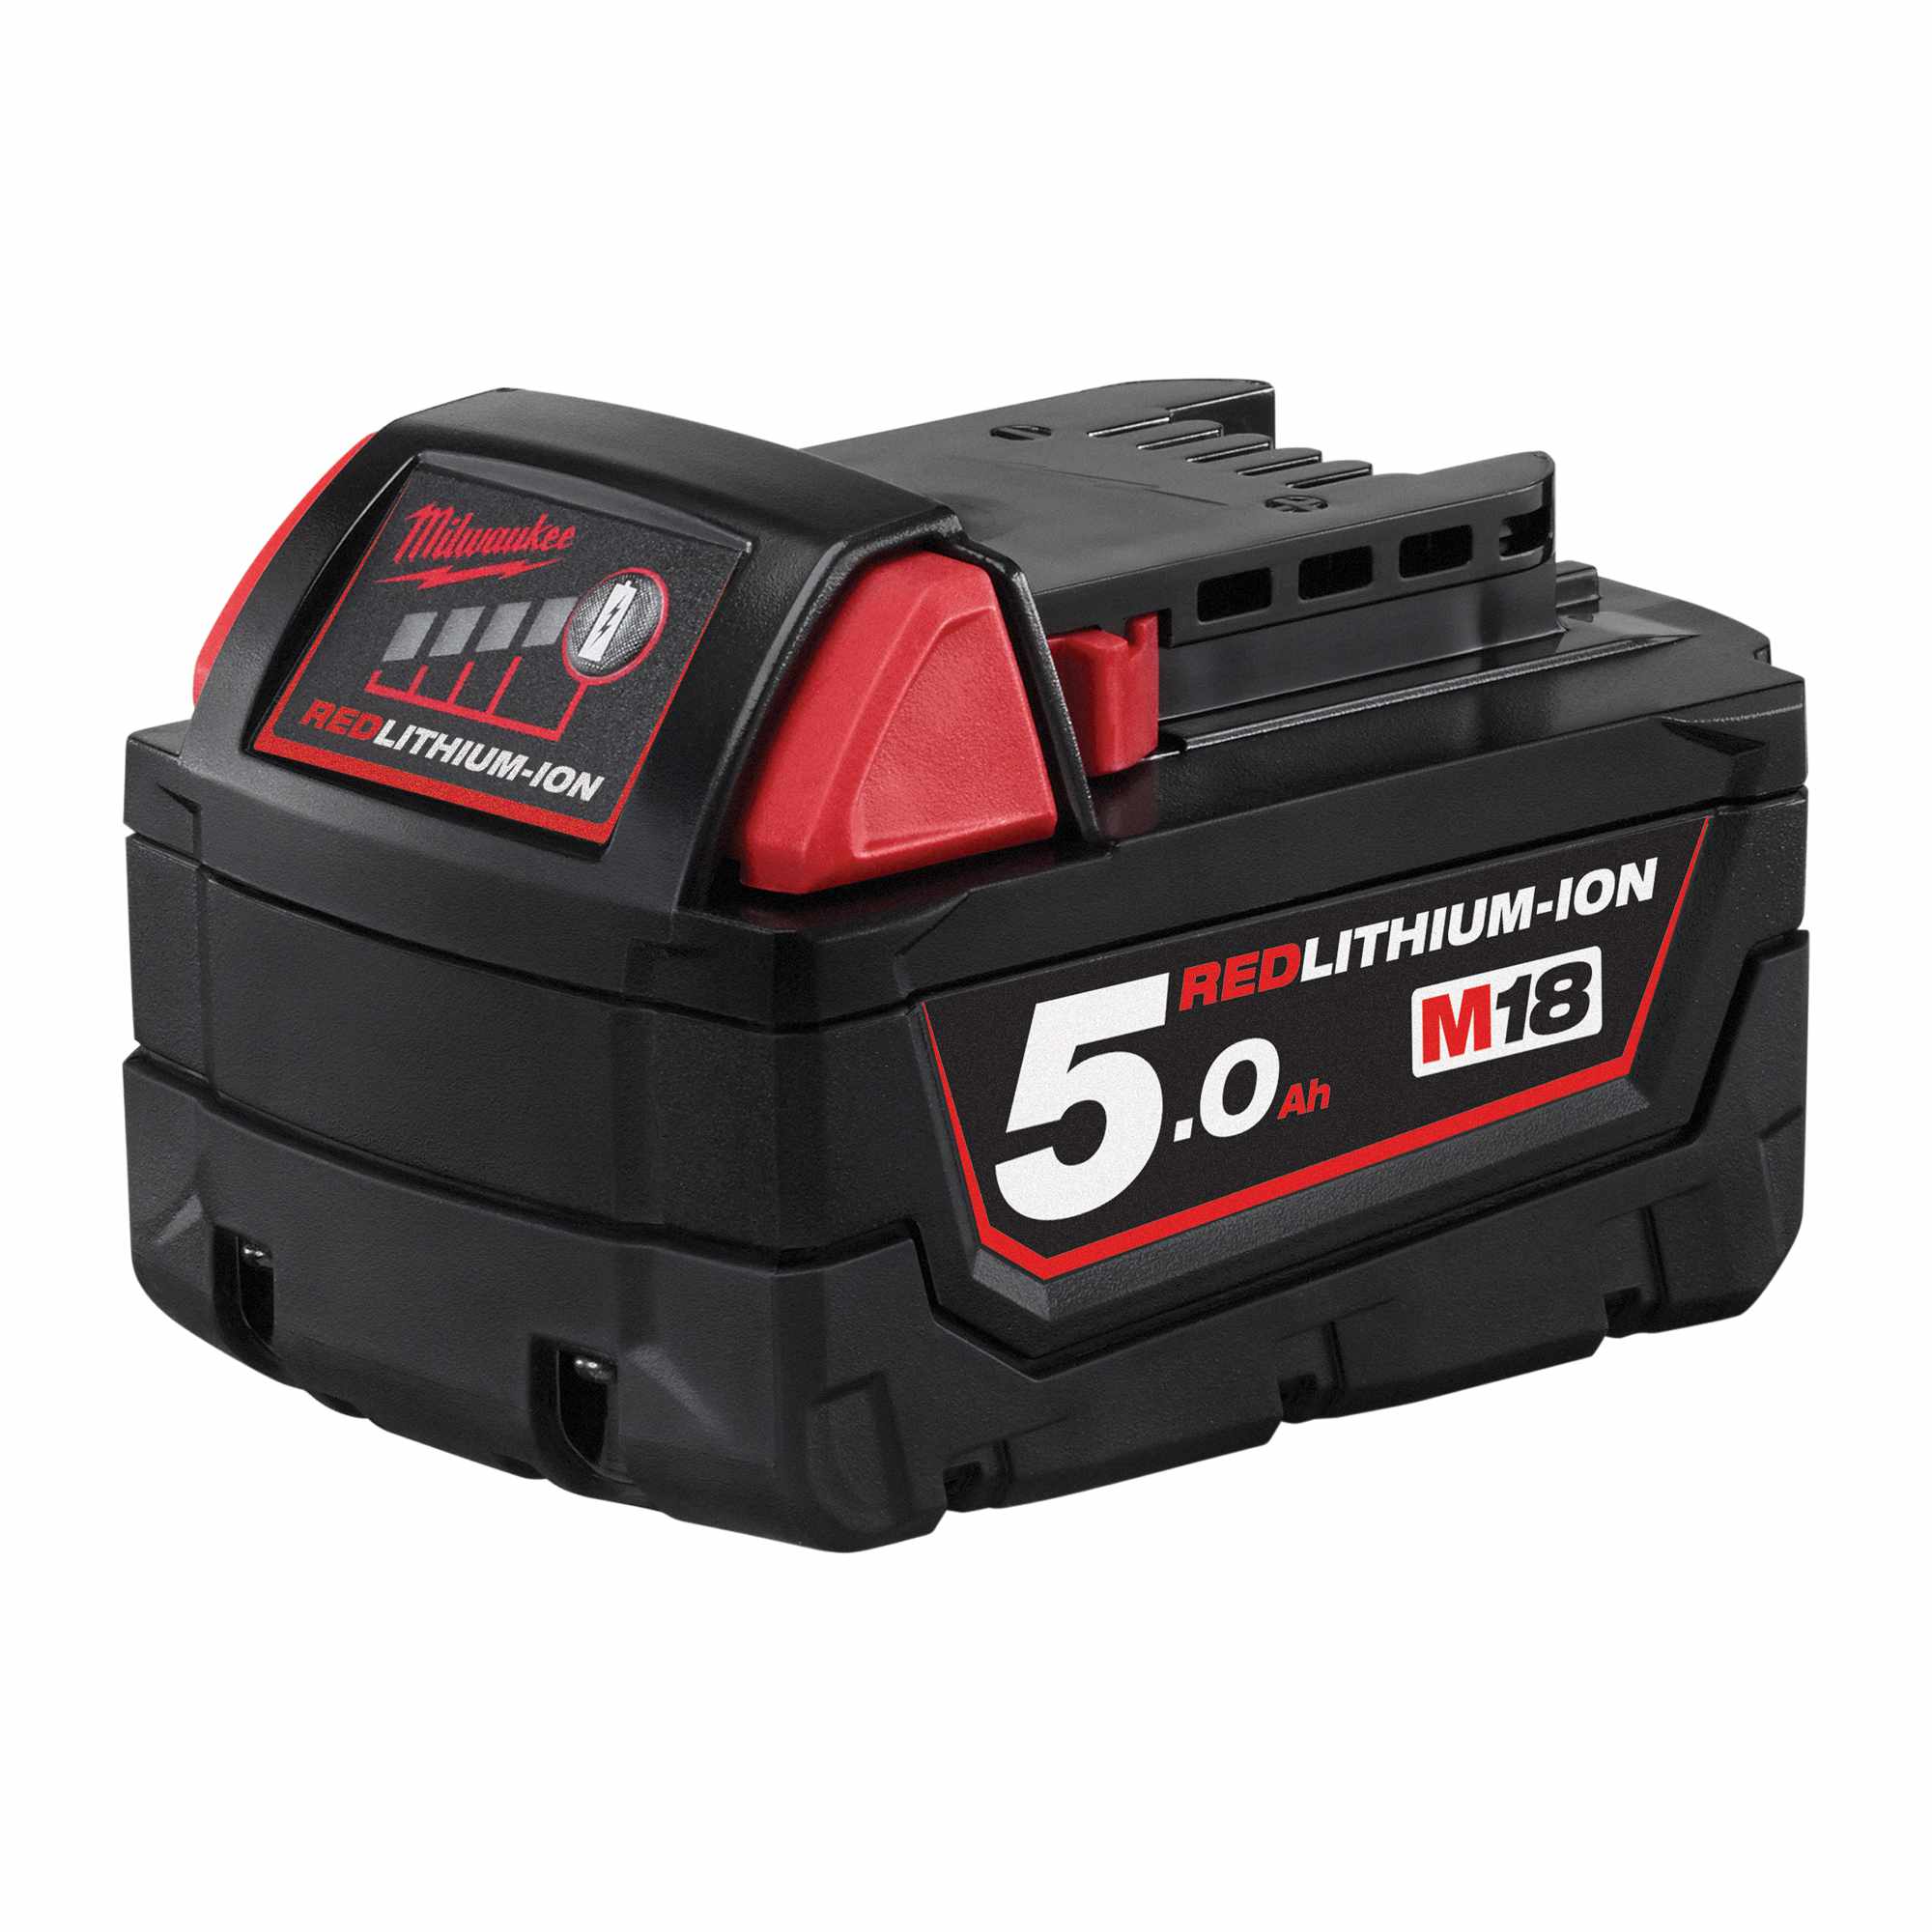 Milwaukee M18B5 M18 5.0AH Red Lithium-Ion Battery